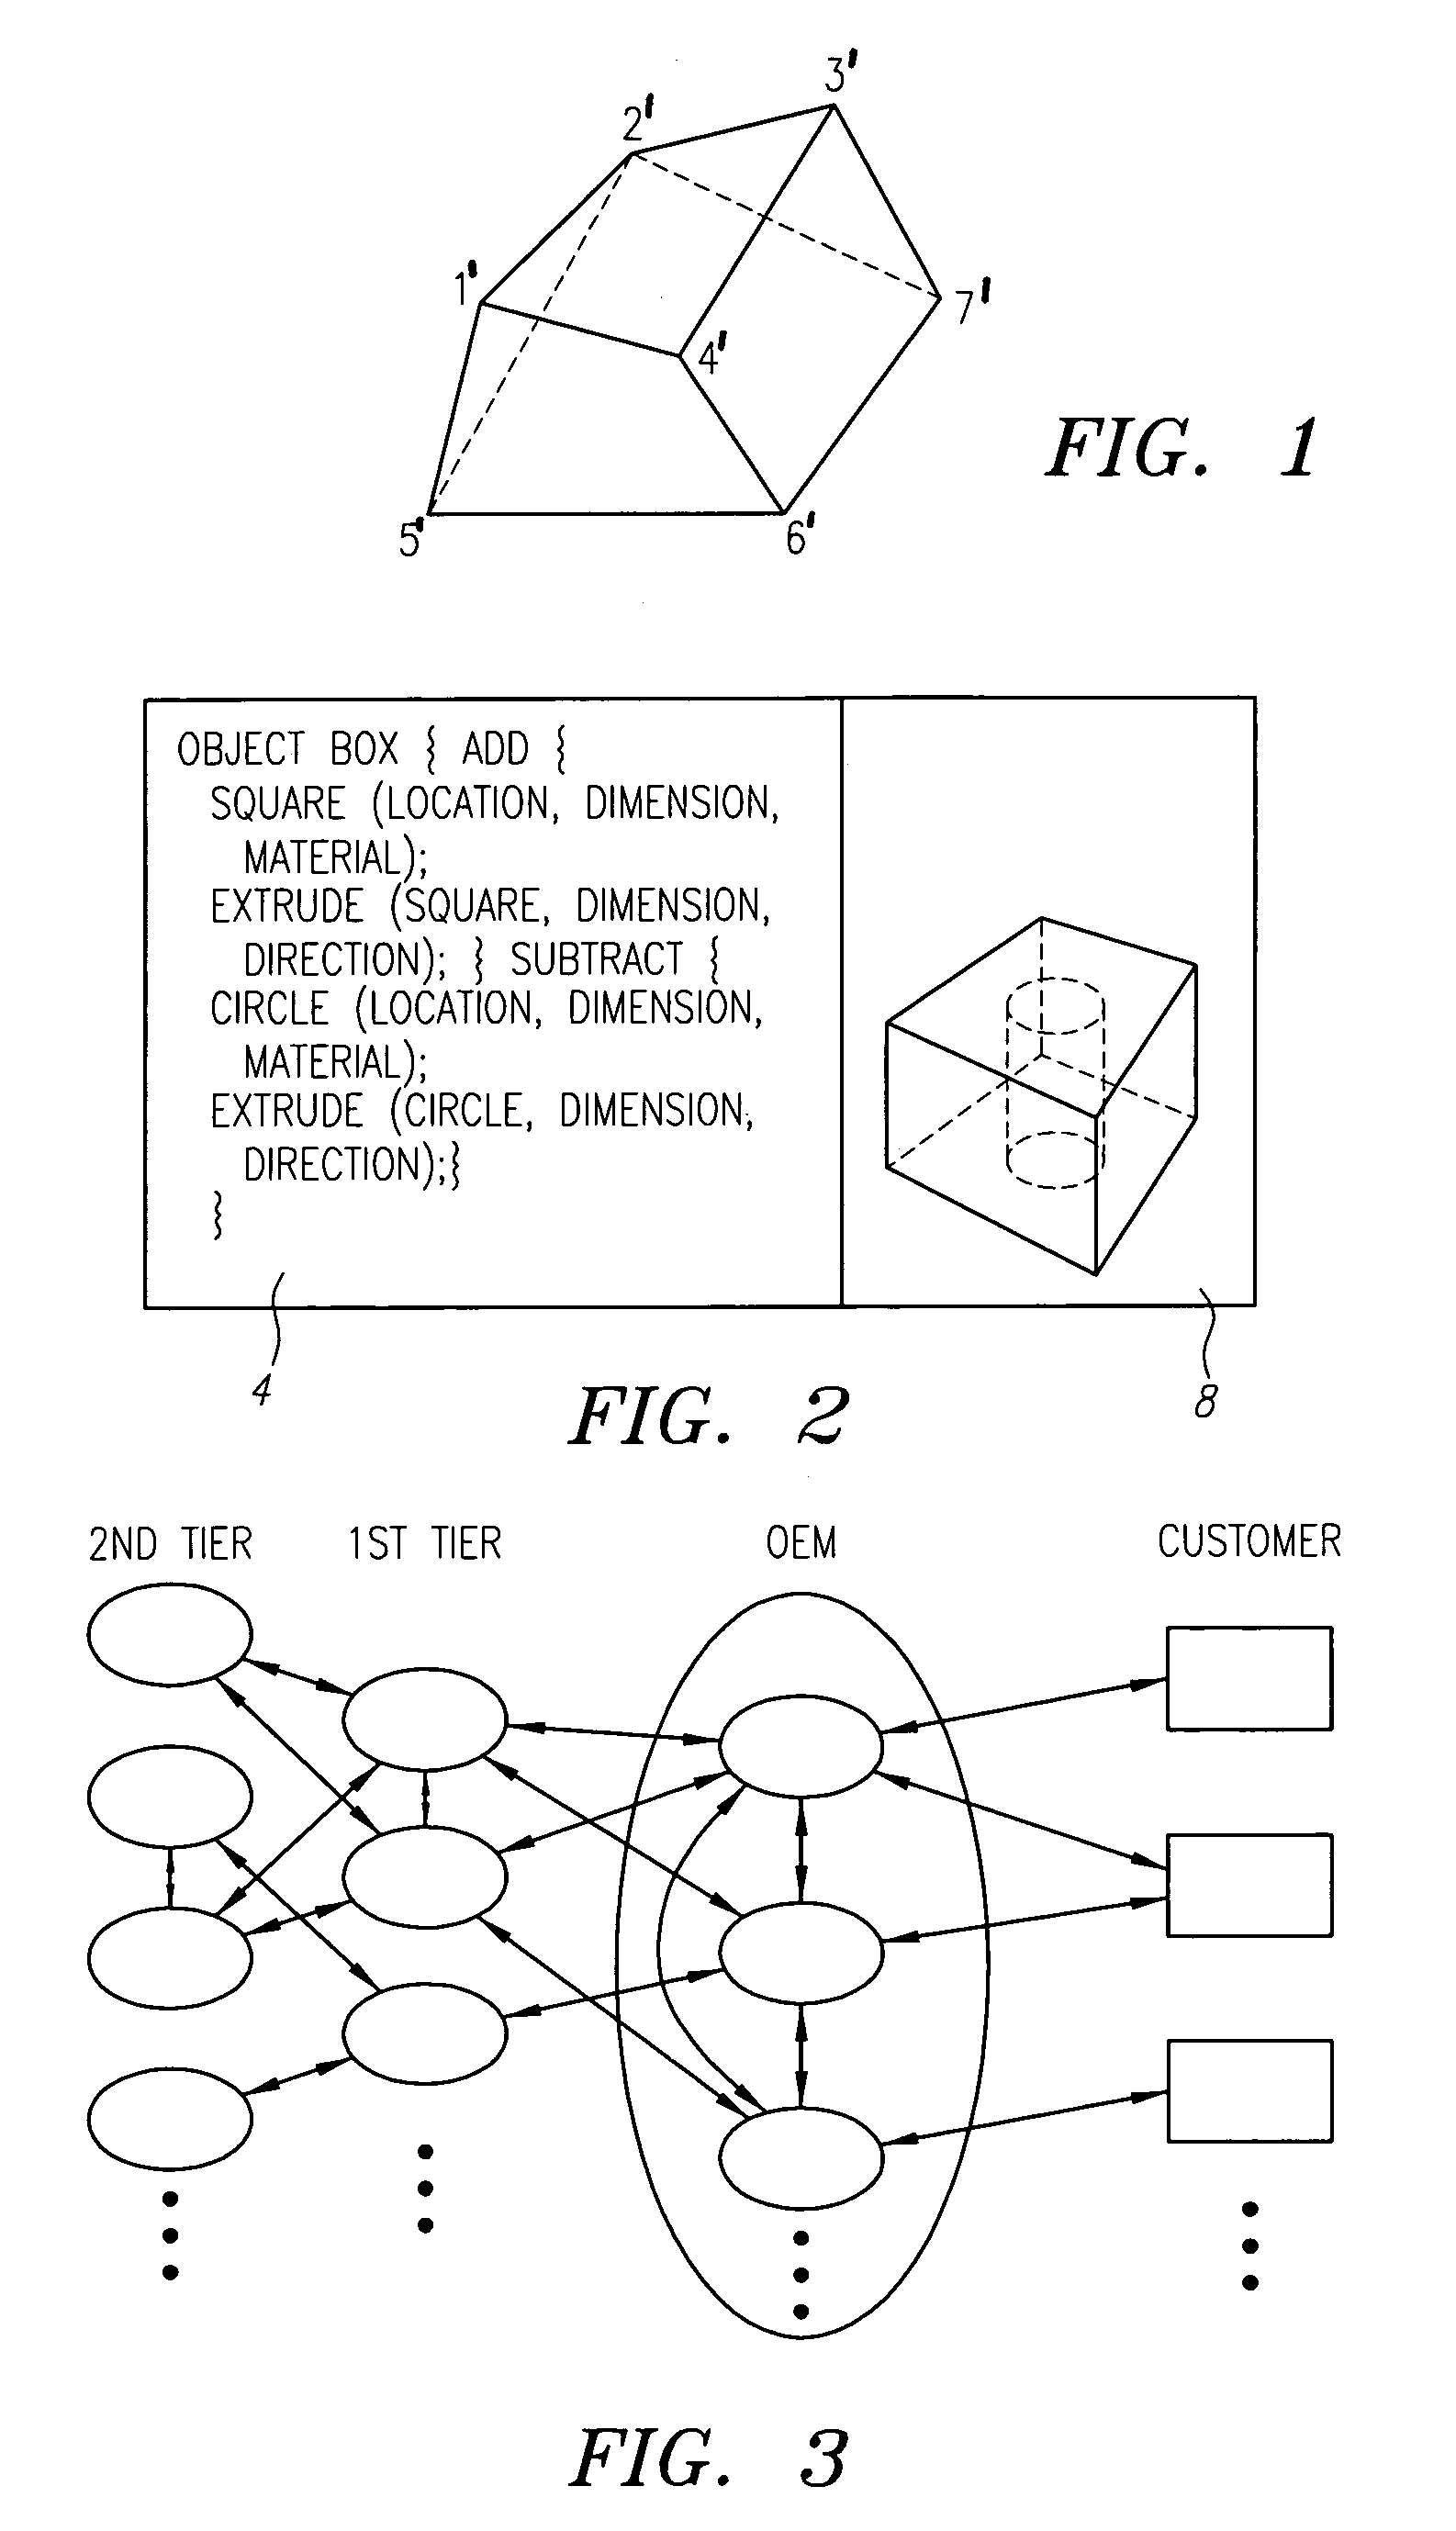 Method and apparatus for edge correlation between design objects